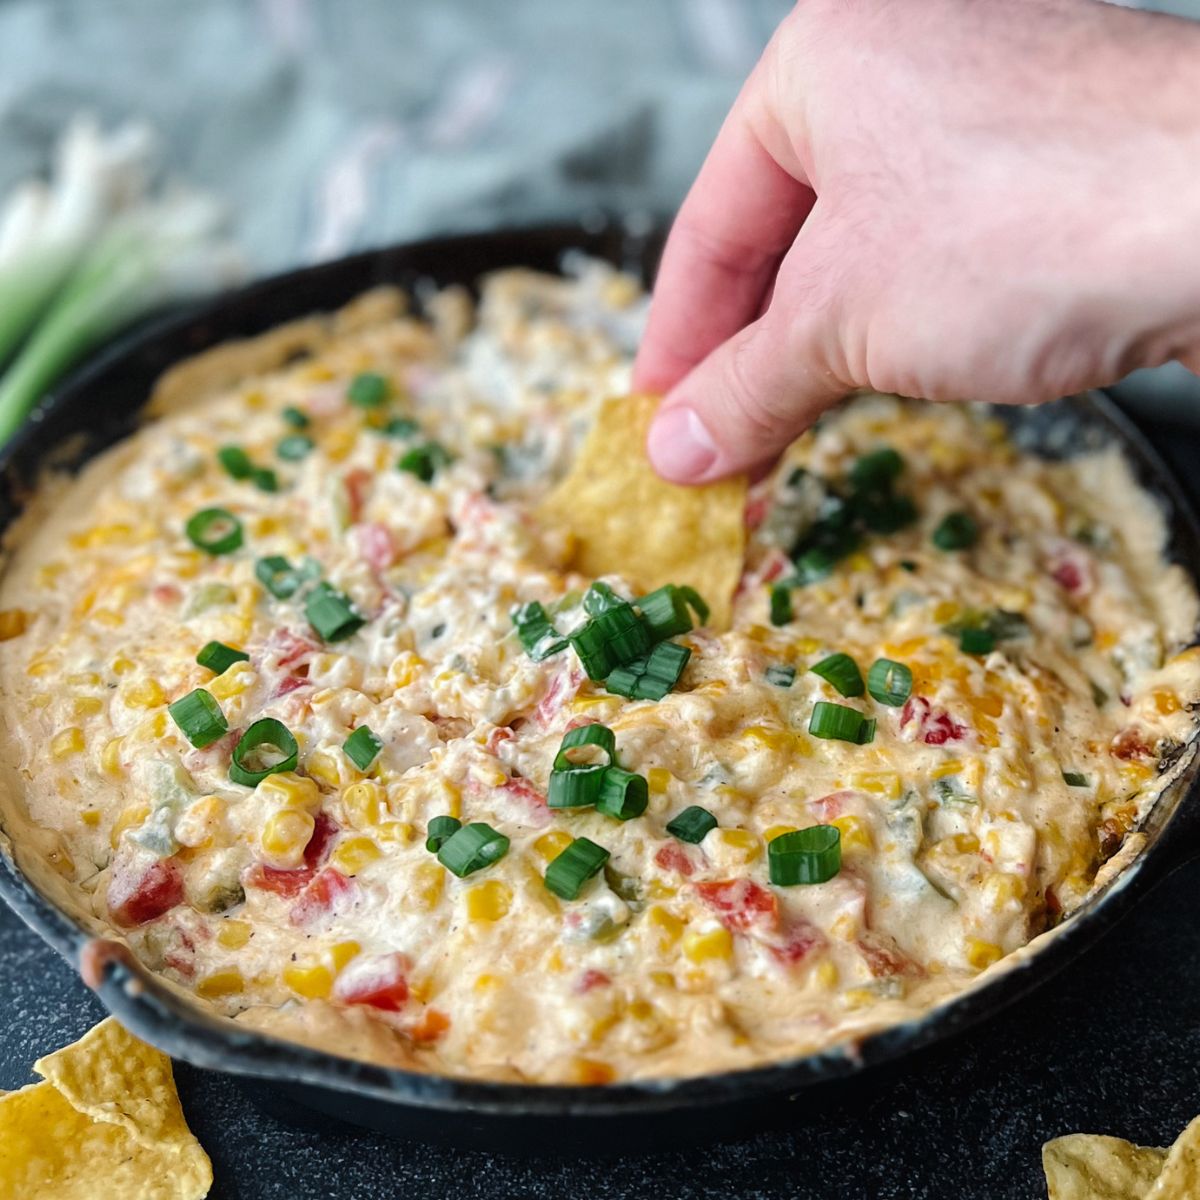 Hand dipping a chip in the skillet of cream cheese corn dip.